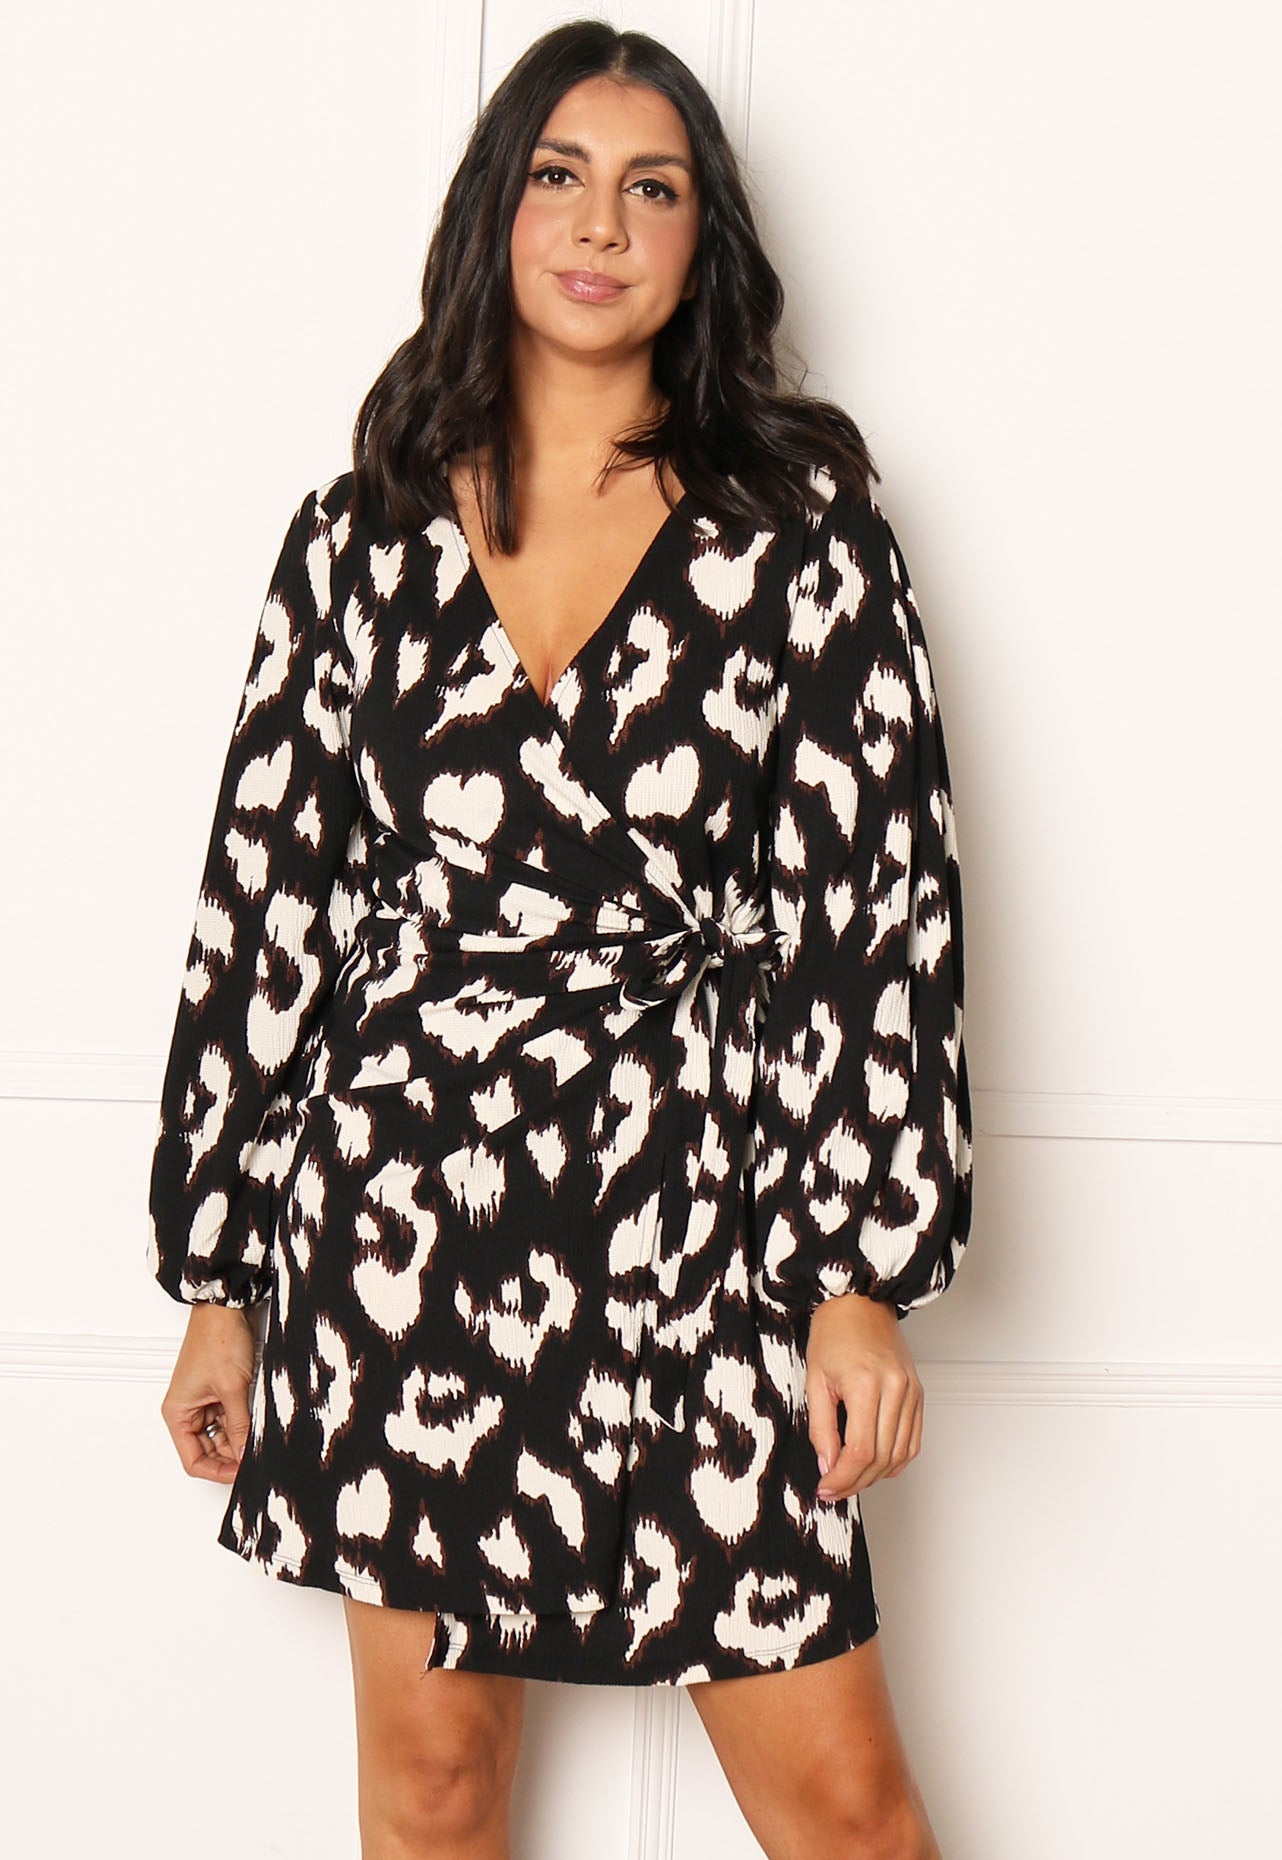 
                  
                    VILA Perry Leopard Print Mini Wrap Dress in Black, Cream & Brown - One Nation Clothing
                  
                